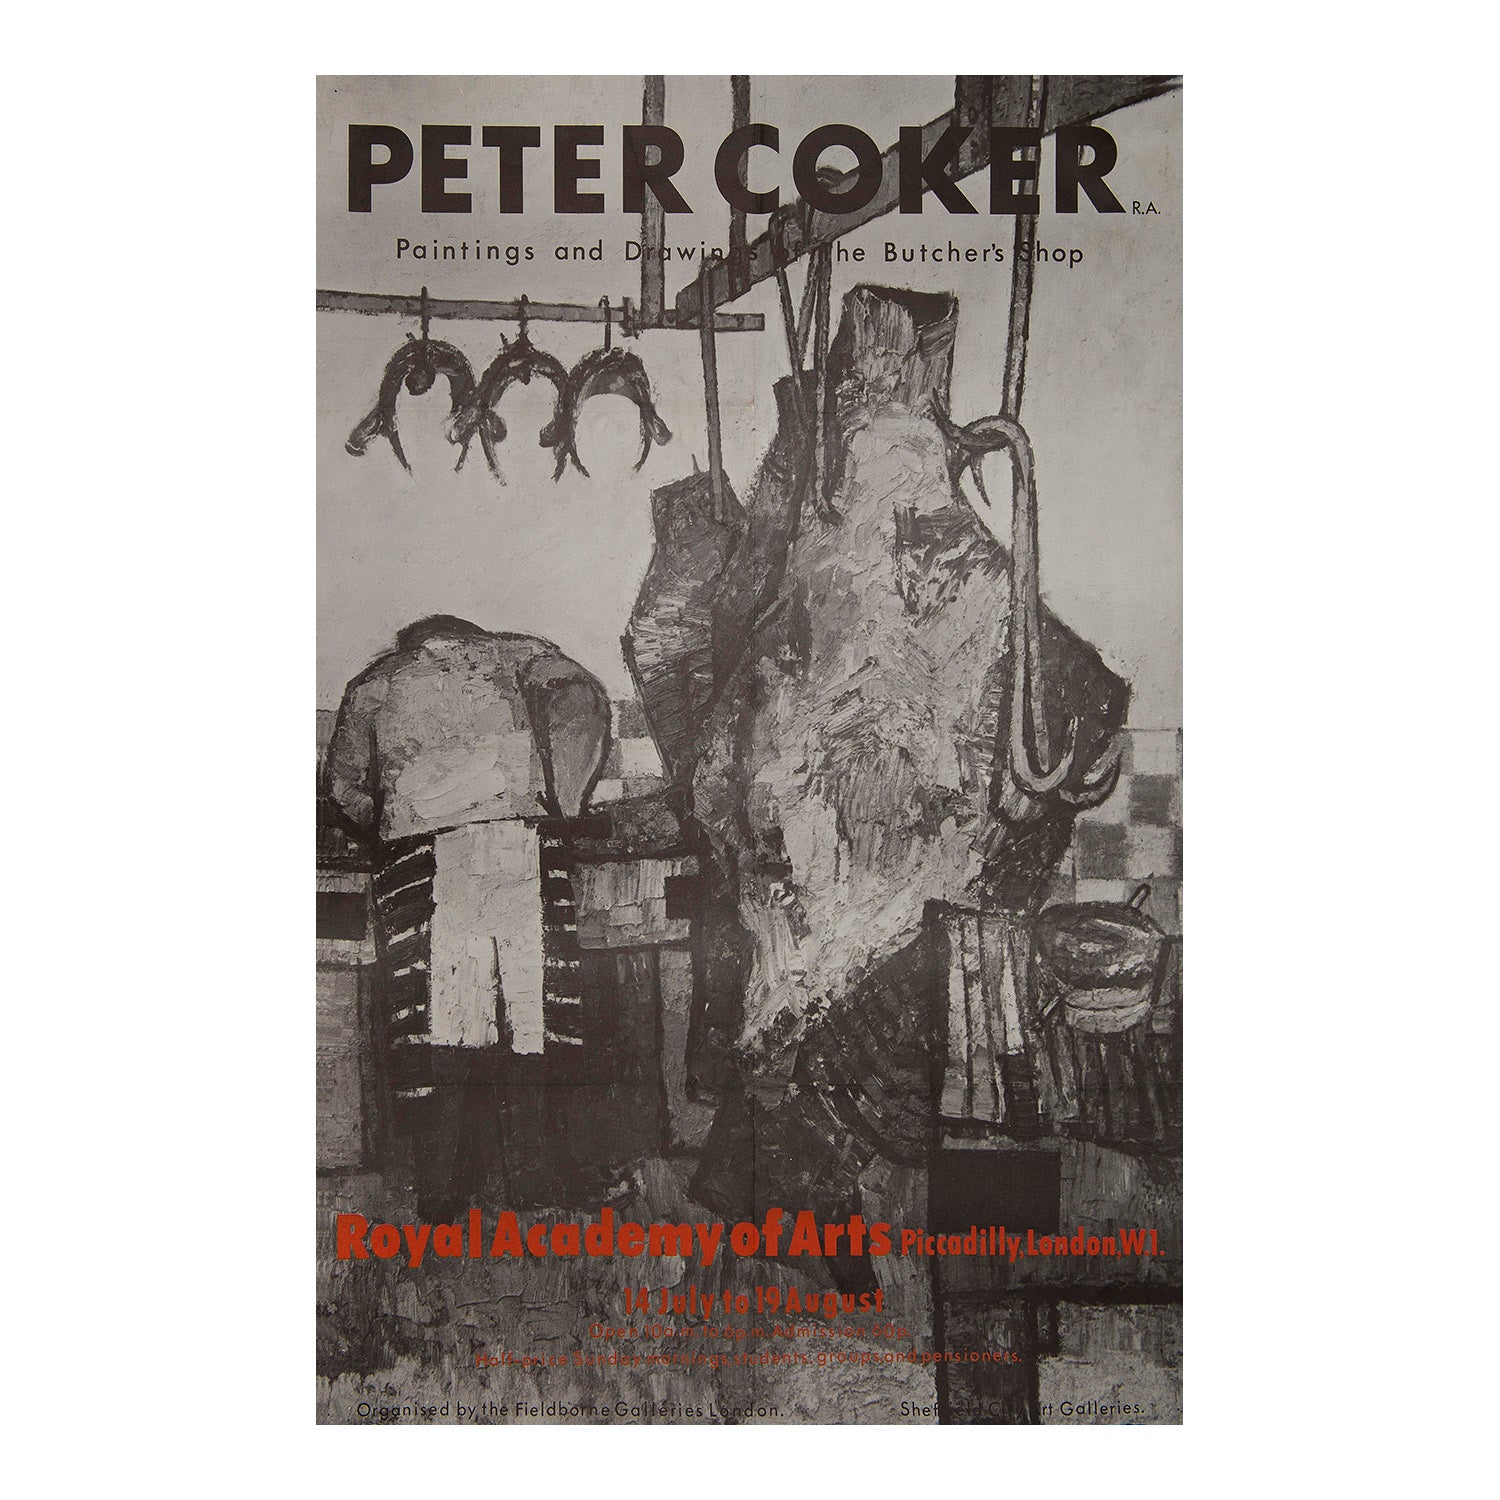 Peter Coker. Paintings and Drawings of the Butcher's Shop